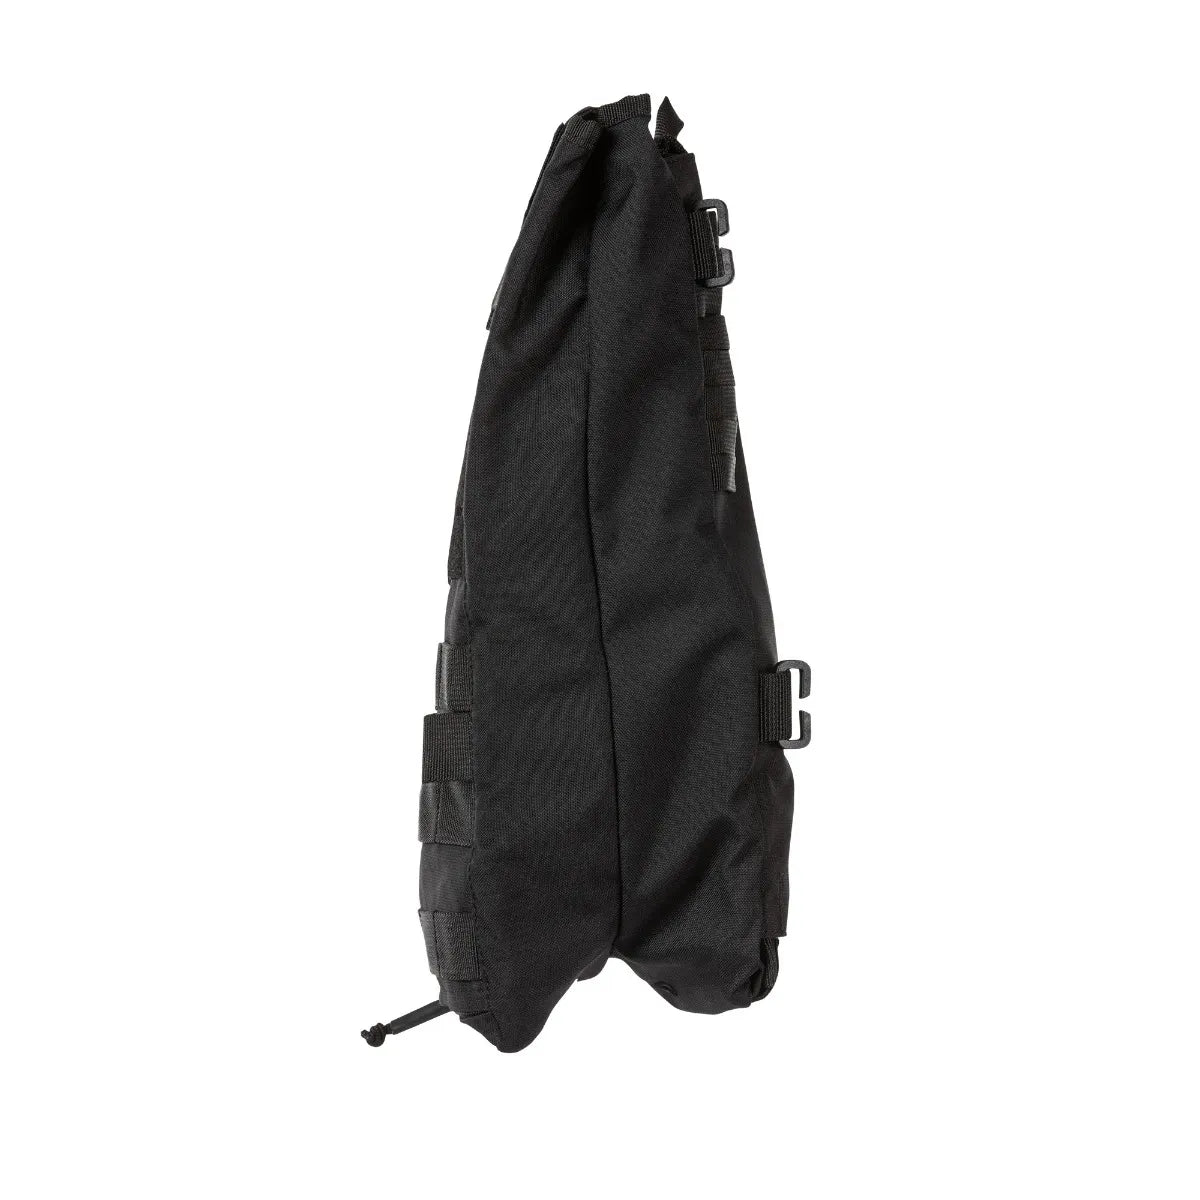 5.11 Tactical PC Convertible Hydration Carrier-Tac Essentials